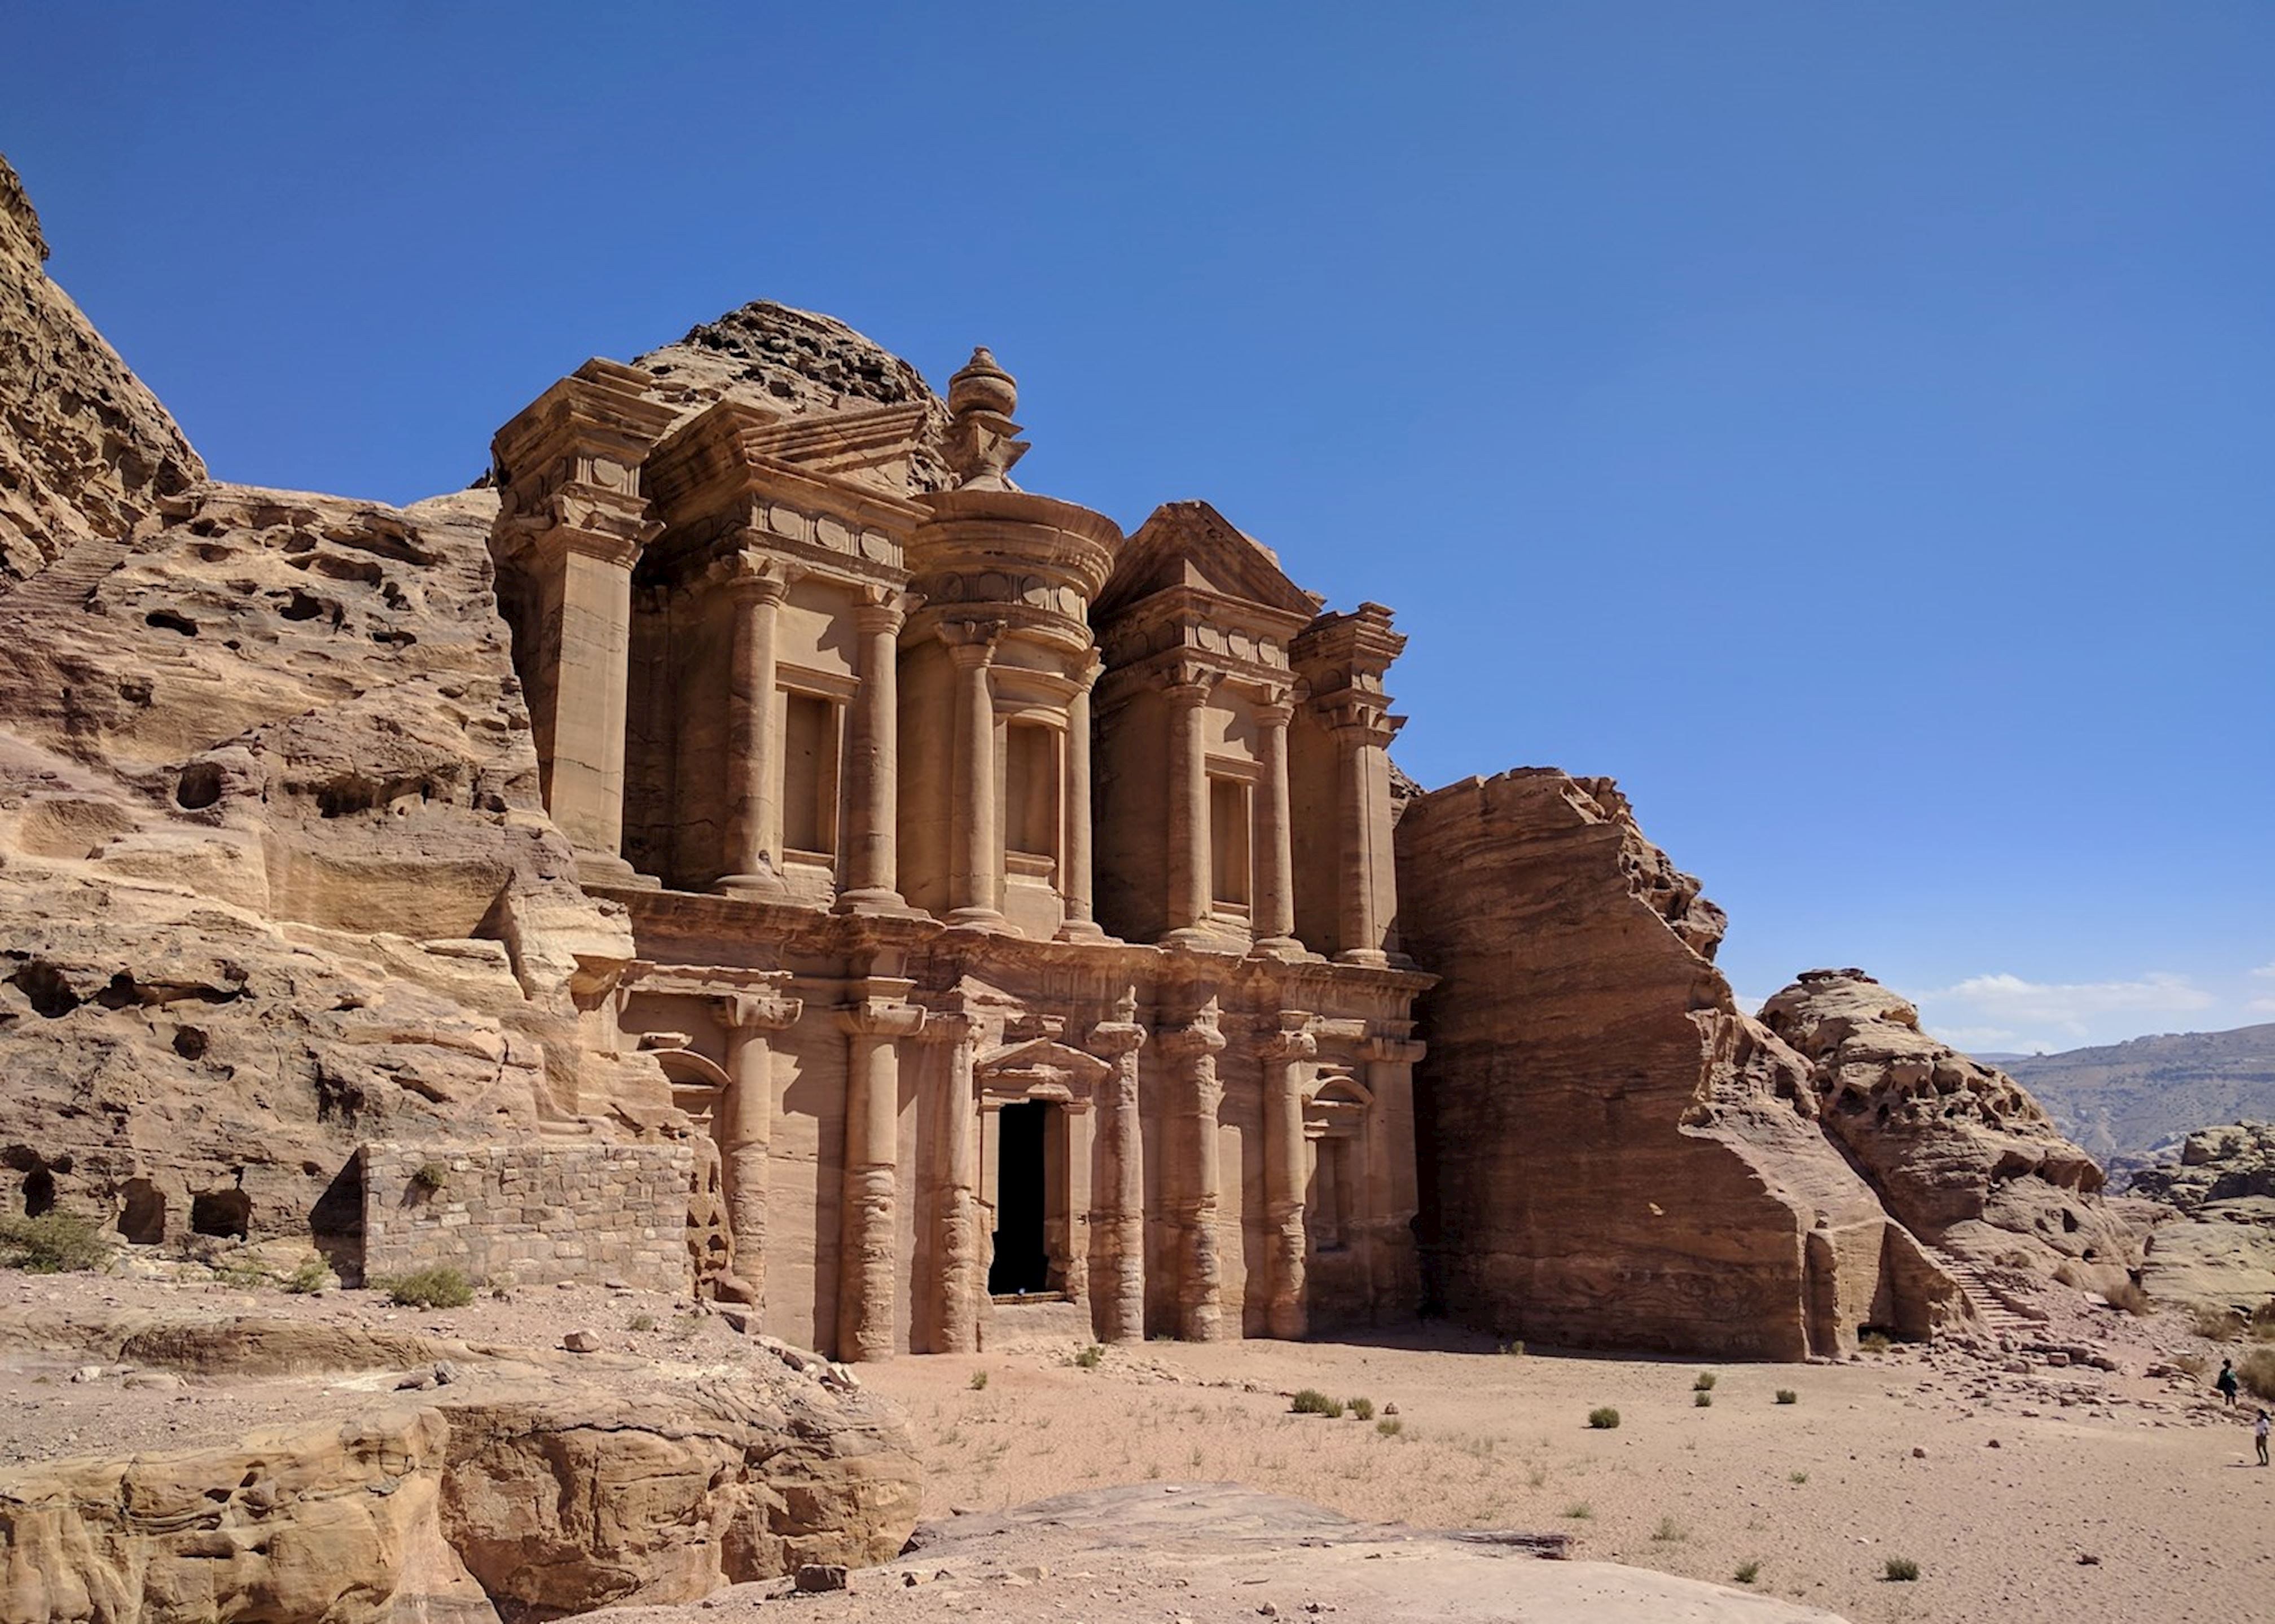 Petra Travel Guide Audley Travel Us